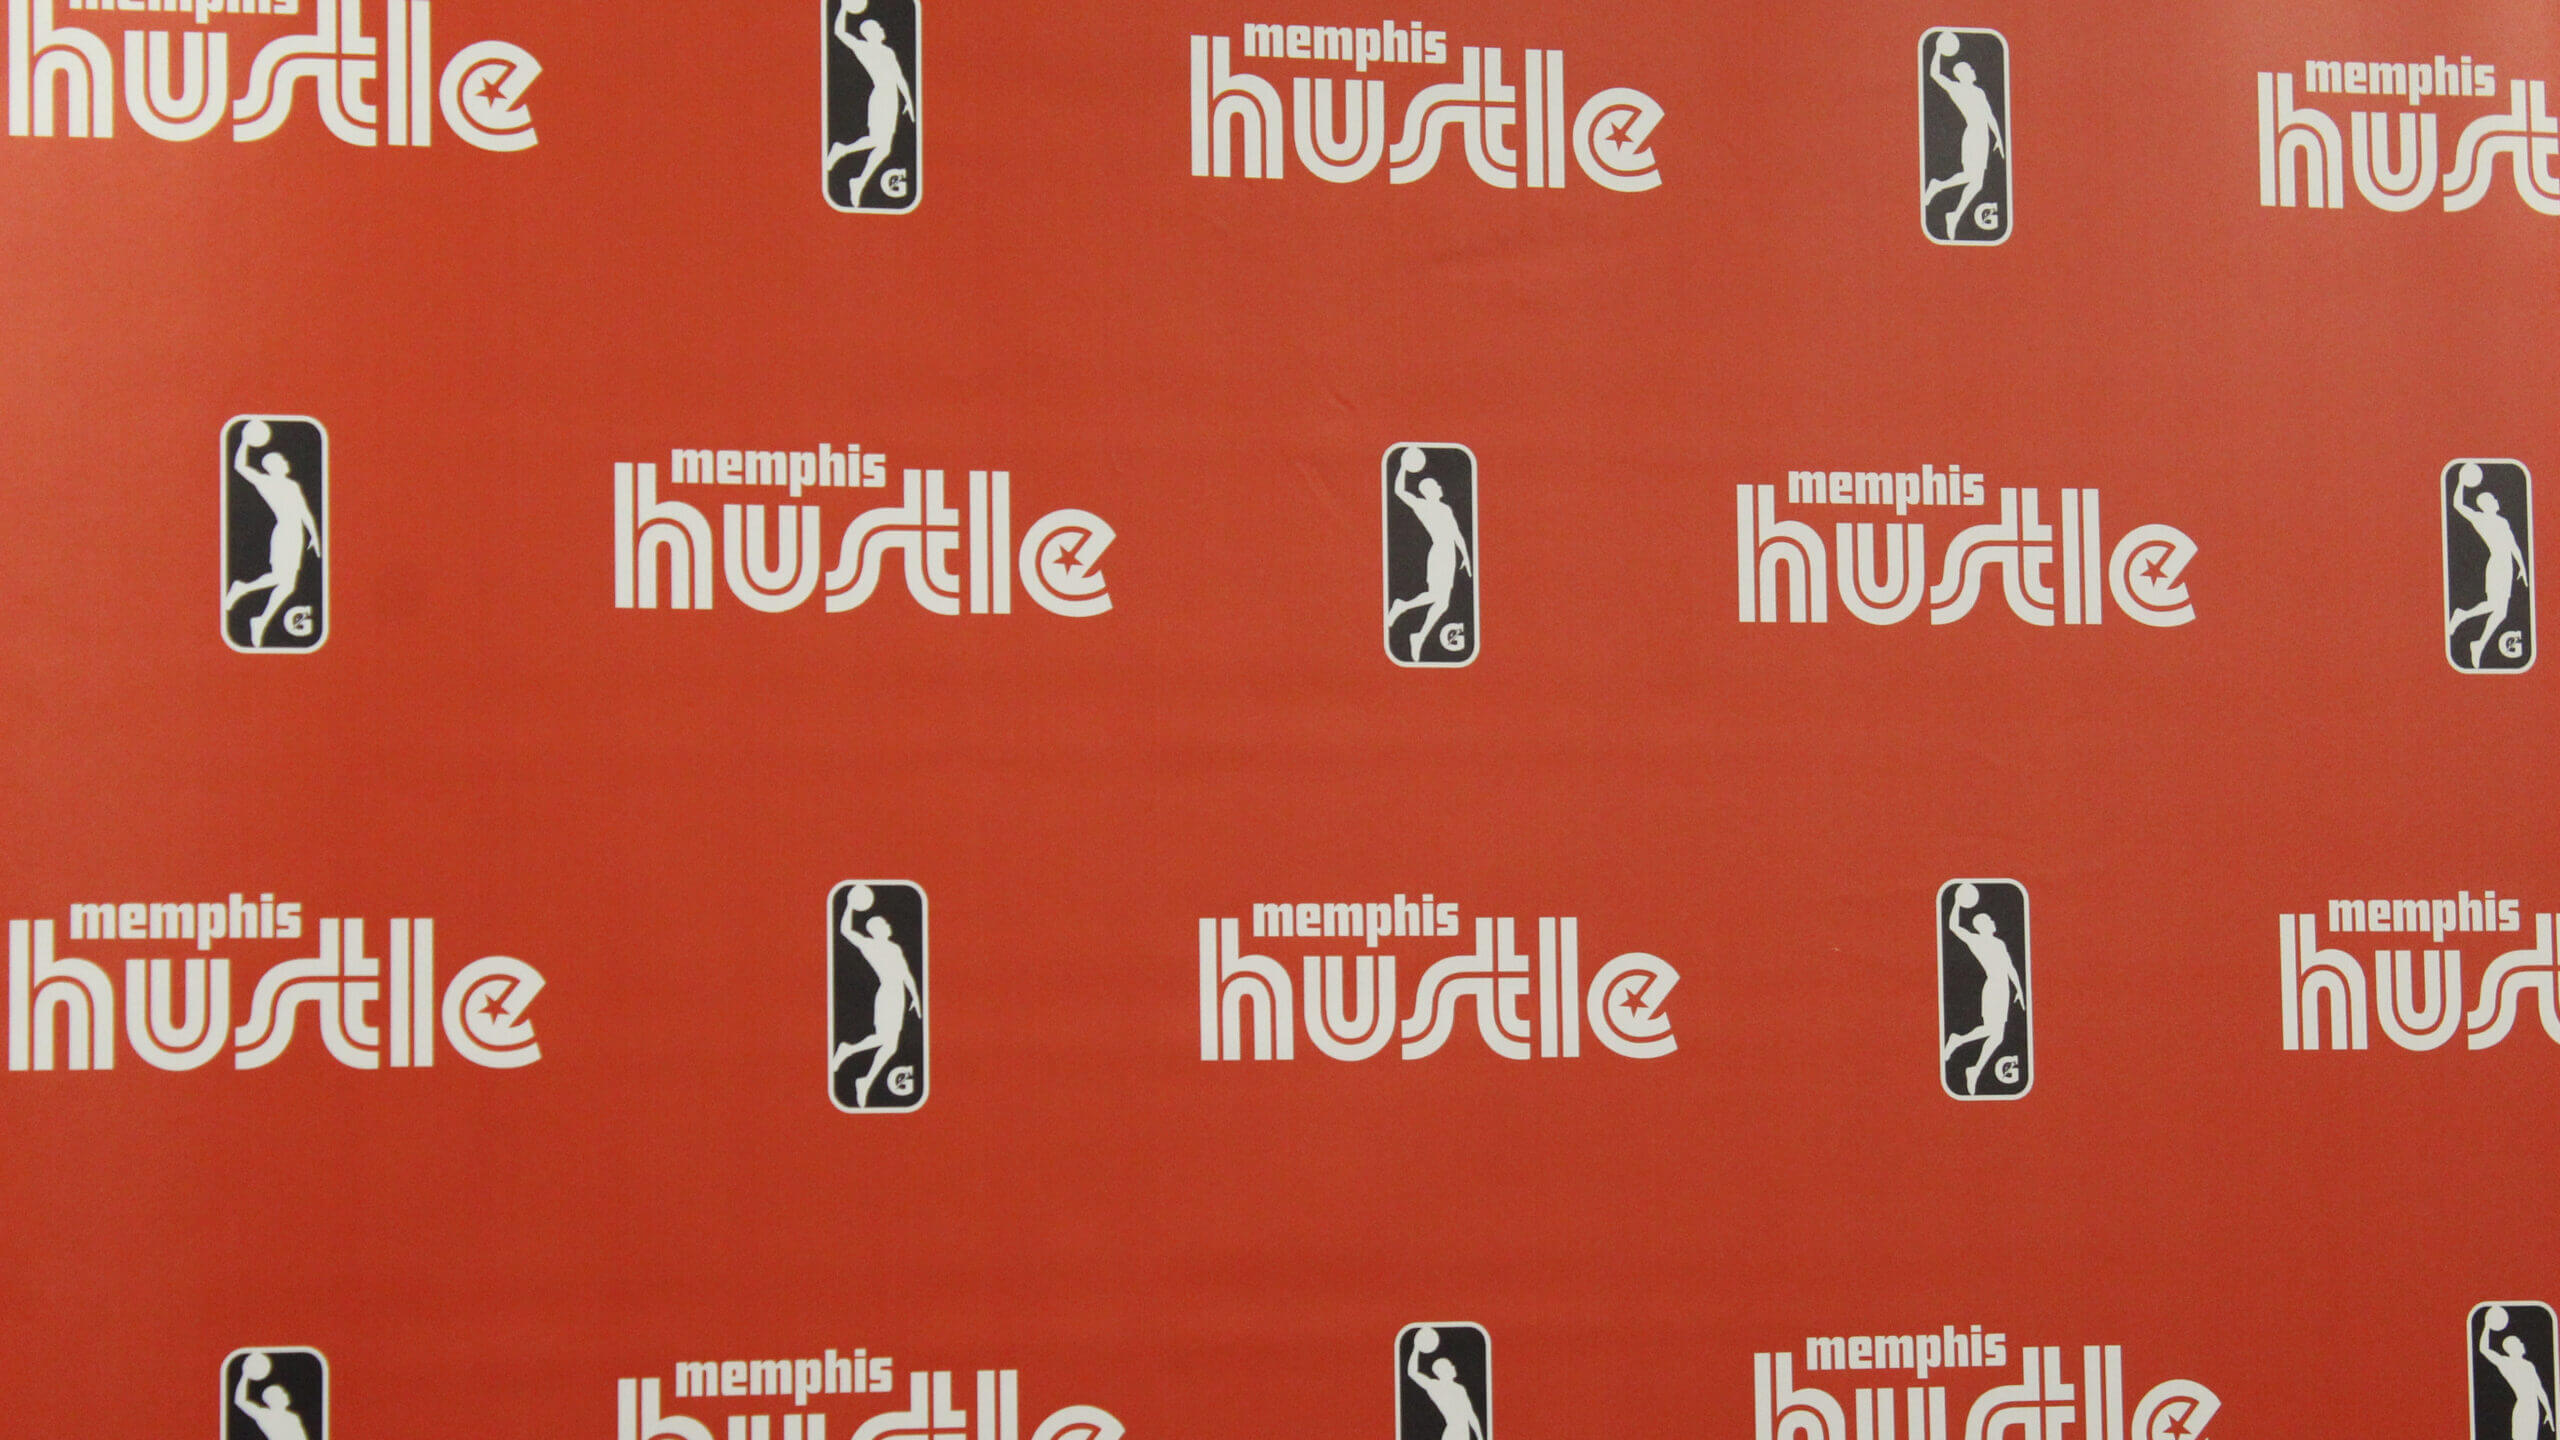 Memphis Hustle 10 Days to Tip-Off events set